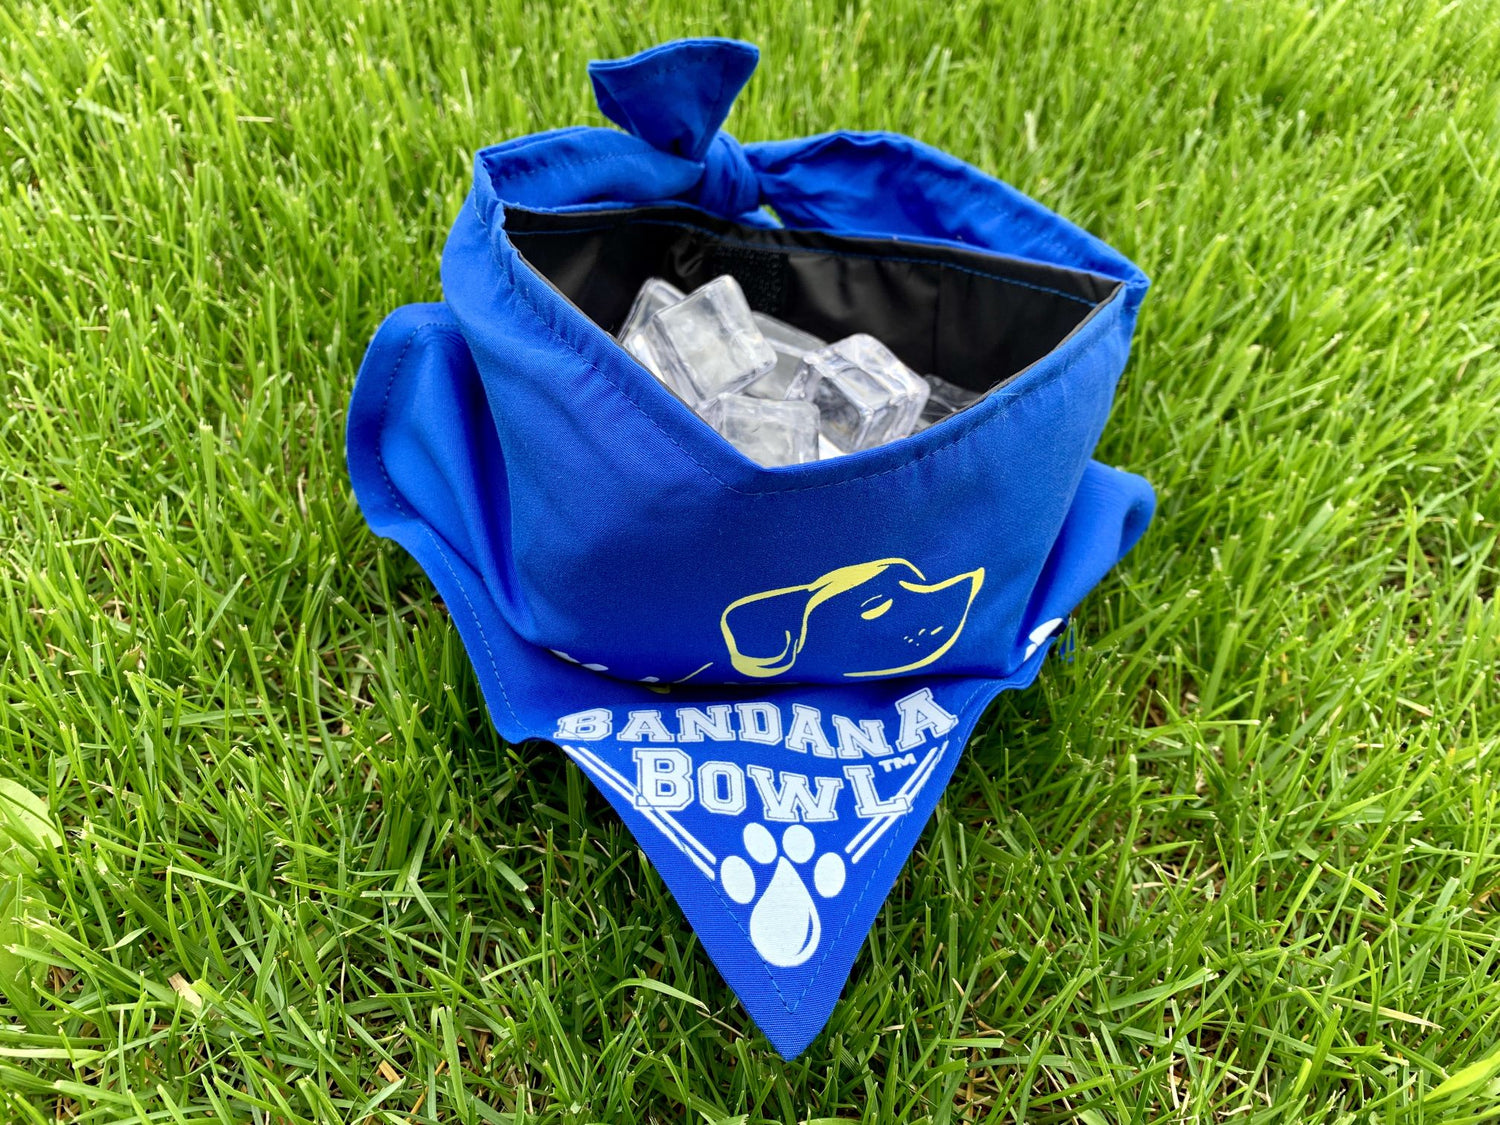 A blue bandana bowl with ice cubes in it on the green grass